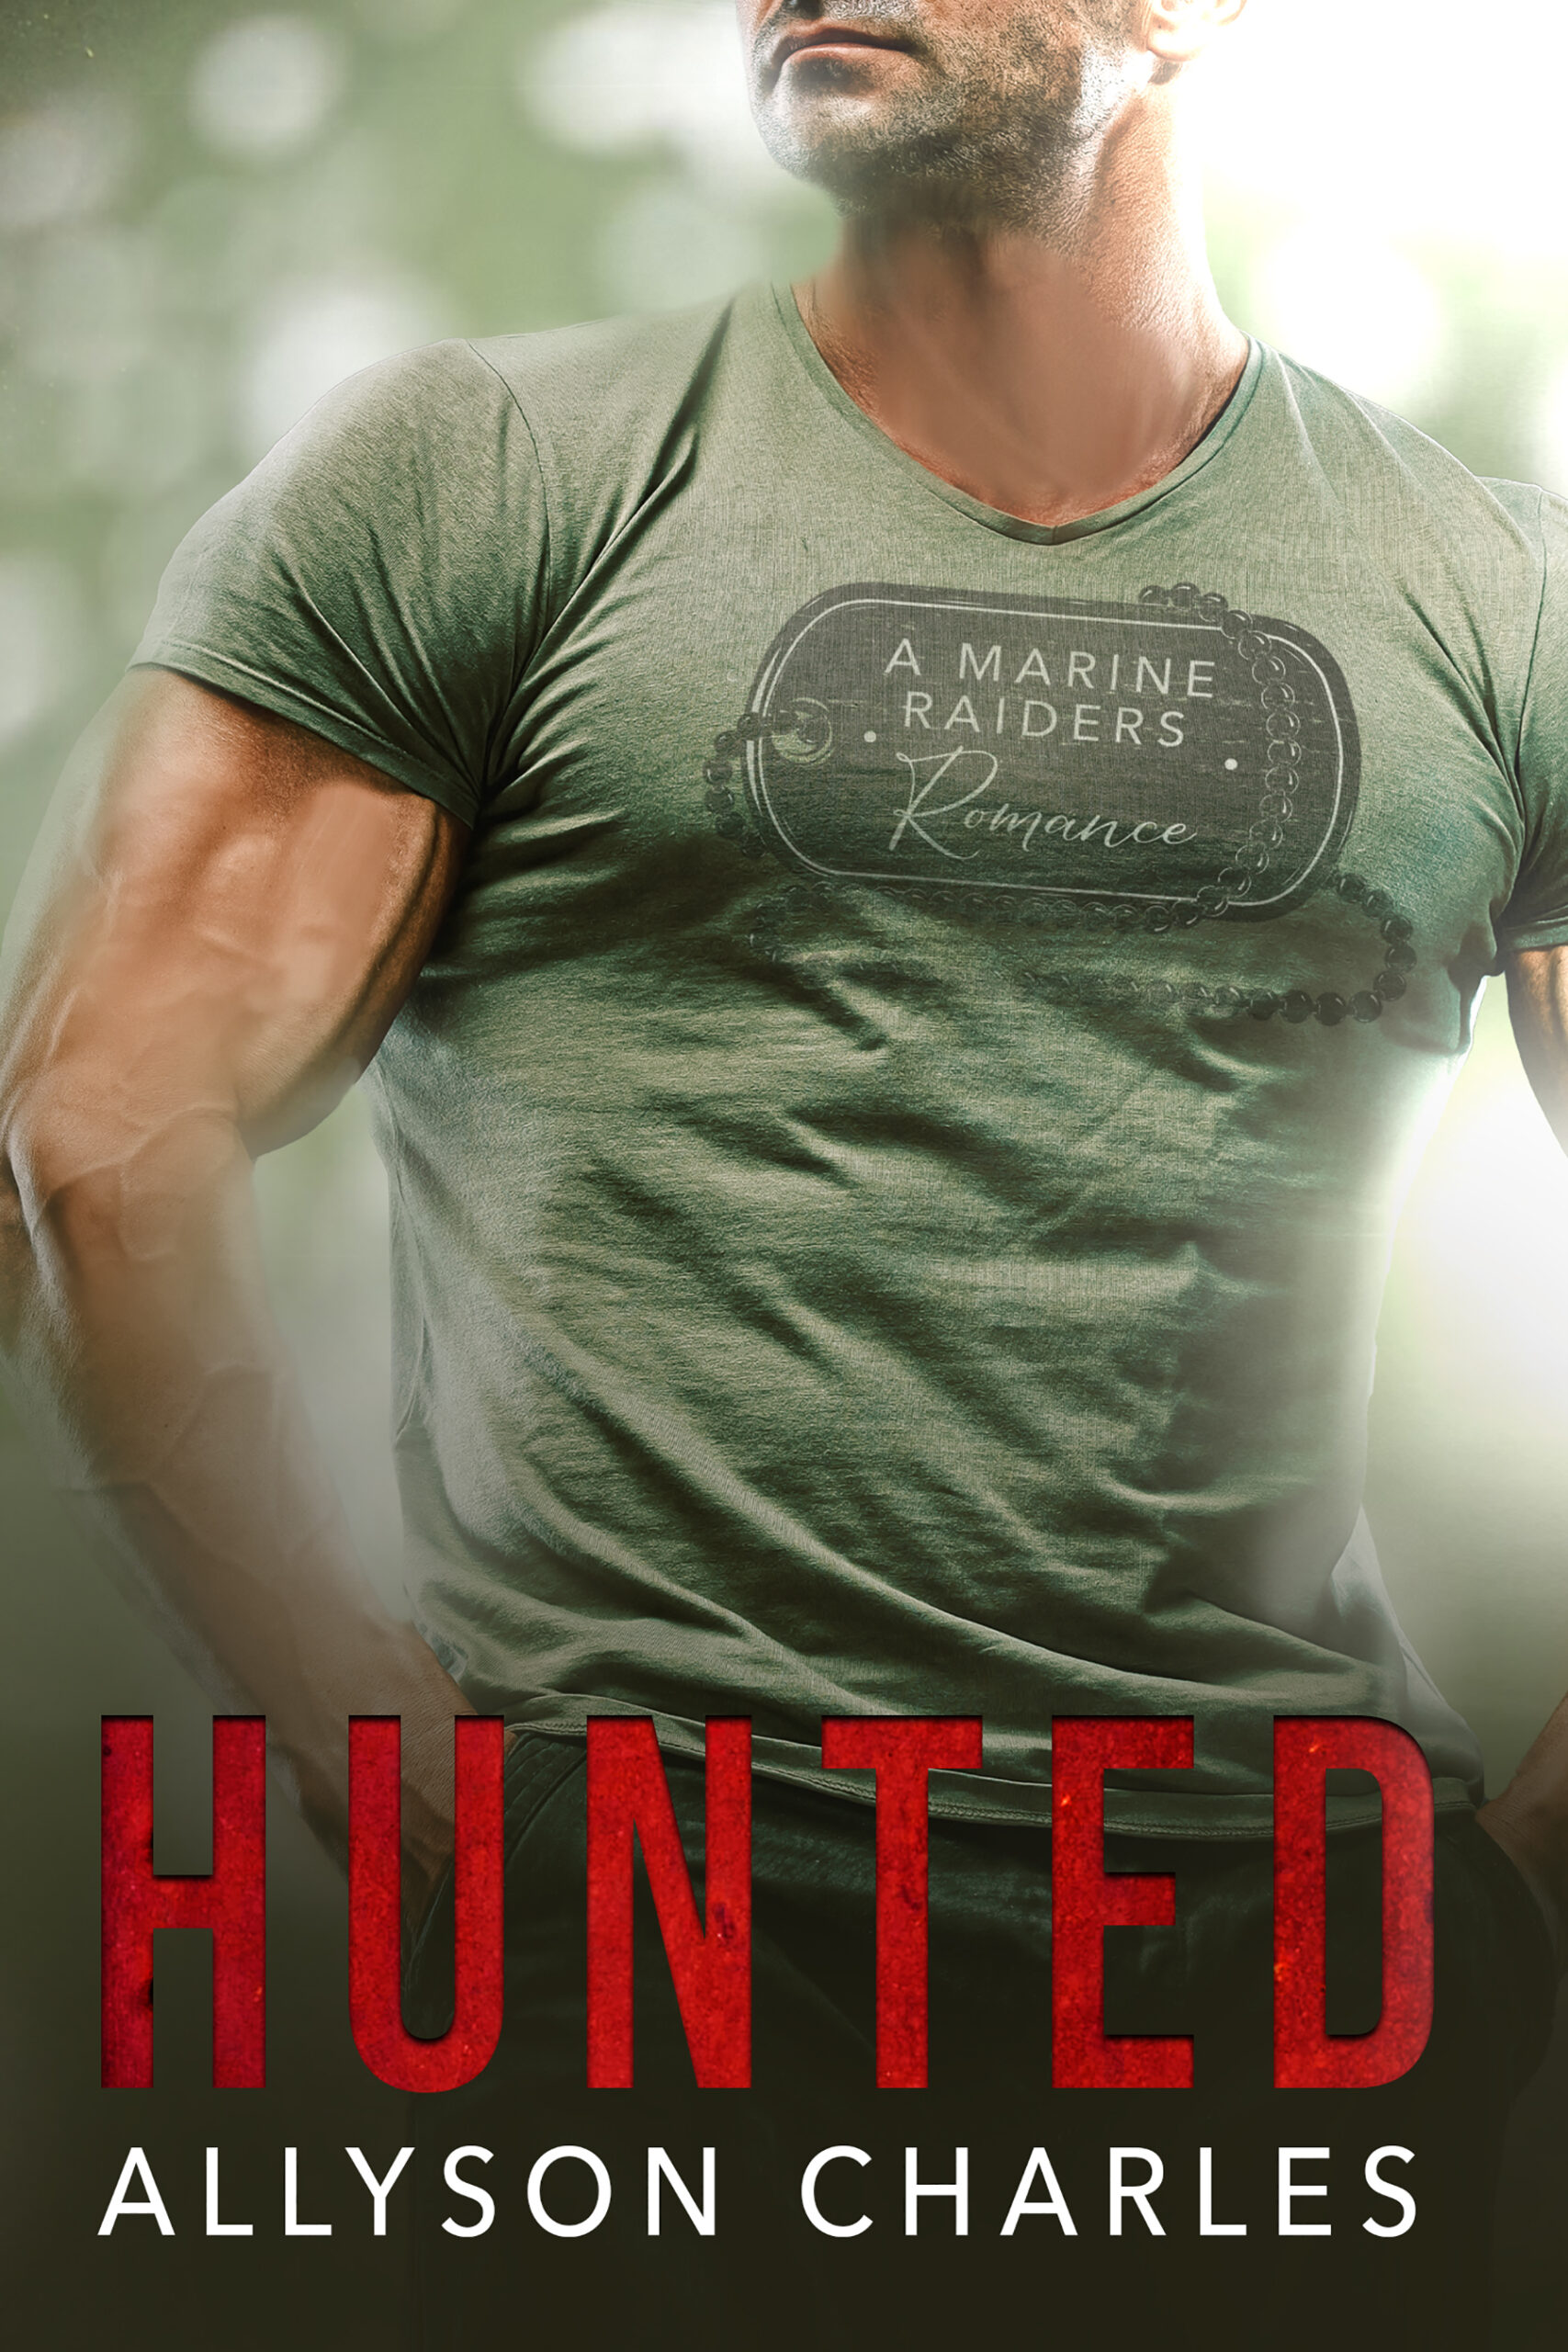 Hunted by Allyson Charles